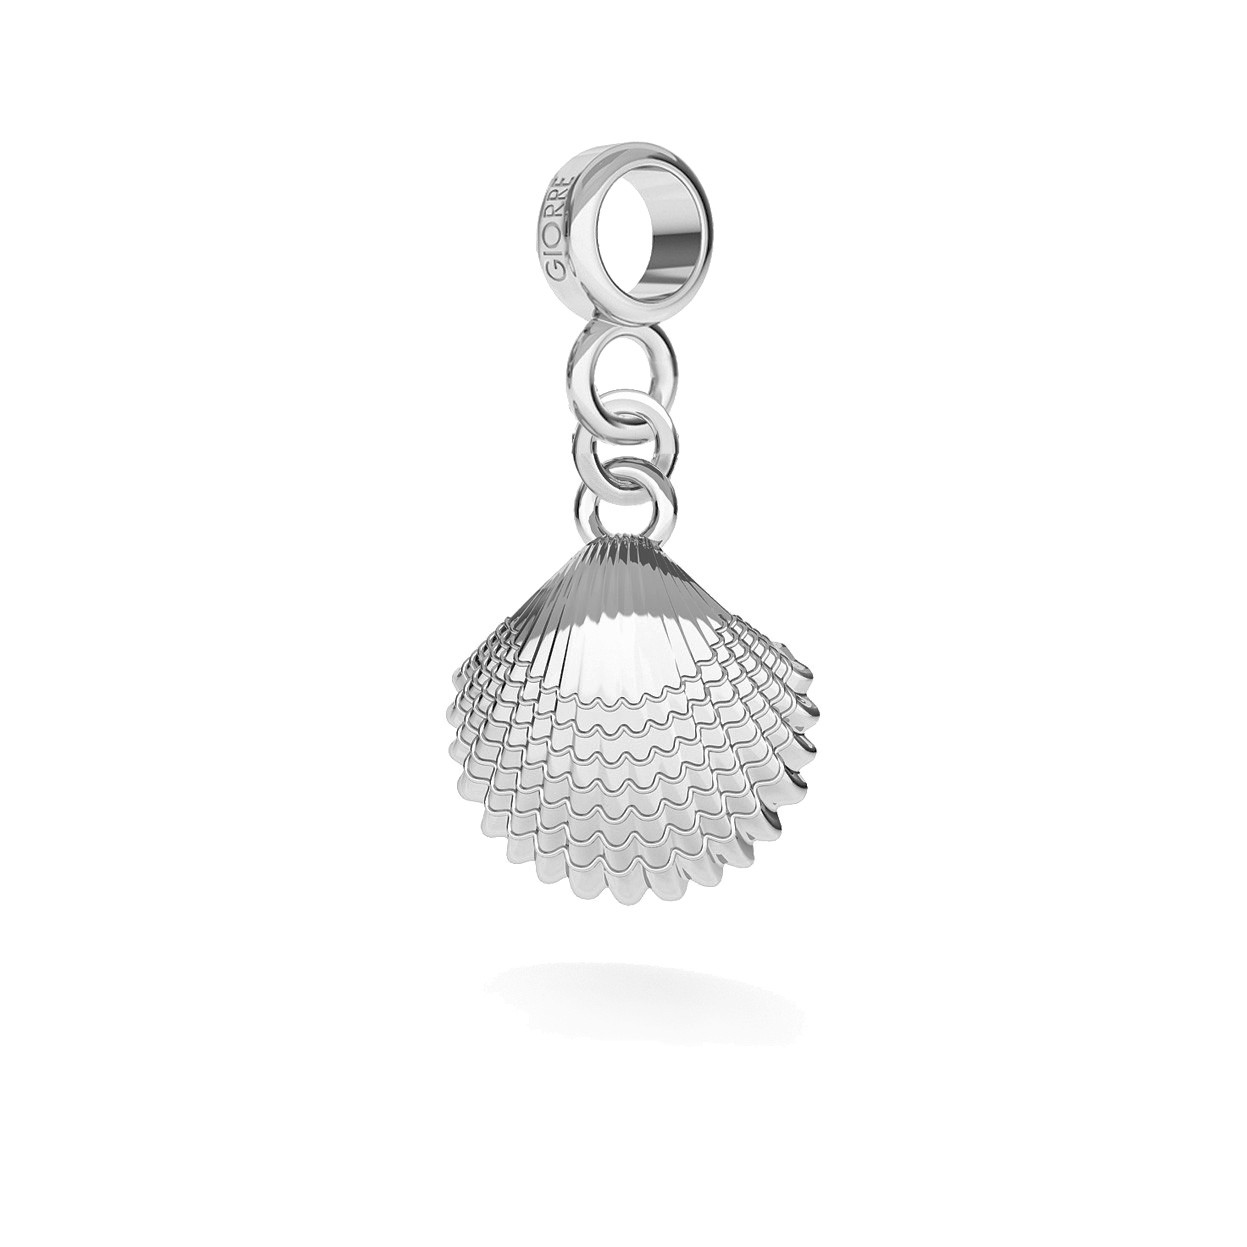 CHARM 88, SMALL SEA SHELL, SILVER 925, RHODIUM OR GOLD PLATED